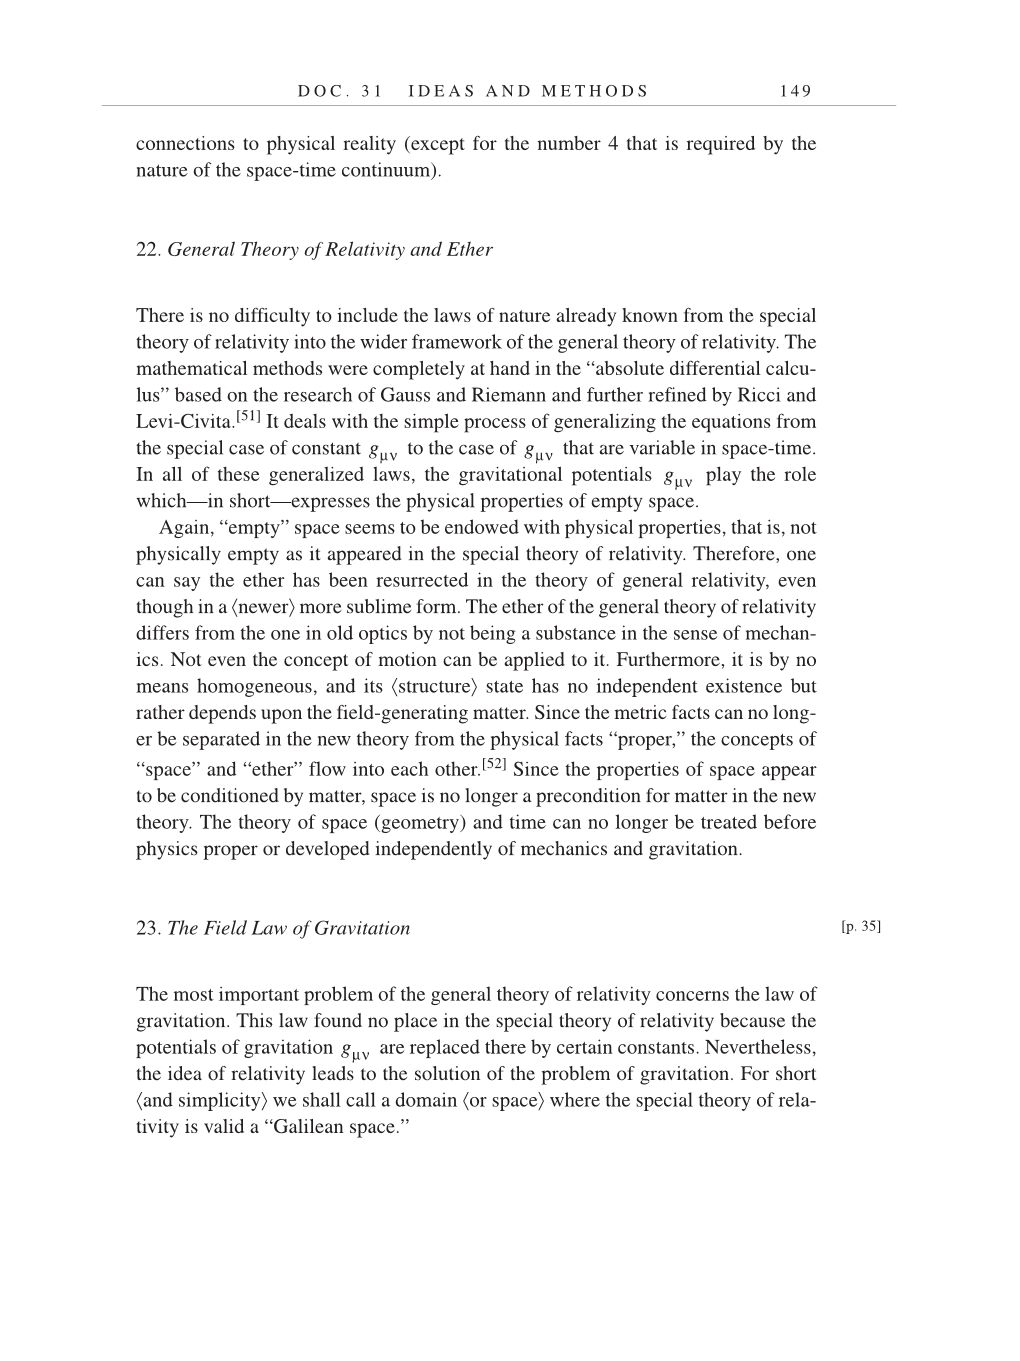 Volume 7: The Berlin Years: Writings, 1918-1921 (English translation supplement) page 149